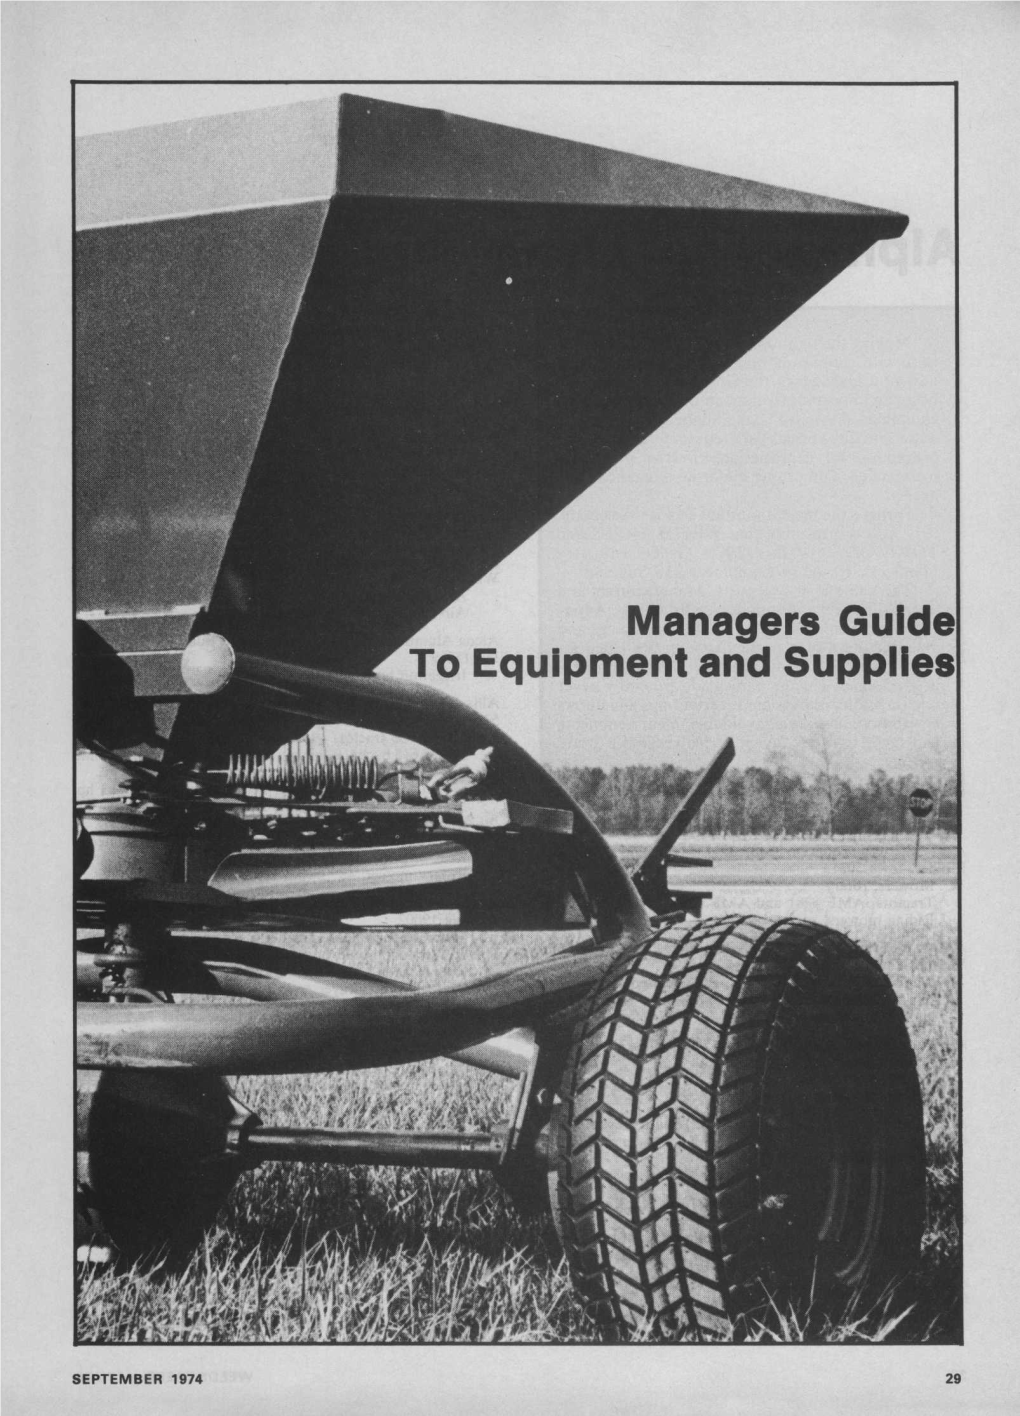 Managers Guide Rto Equipment and Supplies Alphabetical Listing of Suppliers